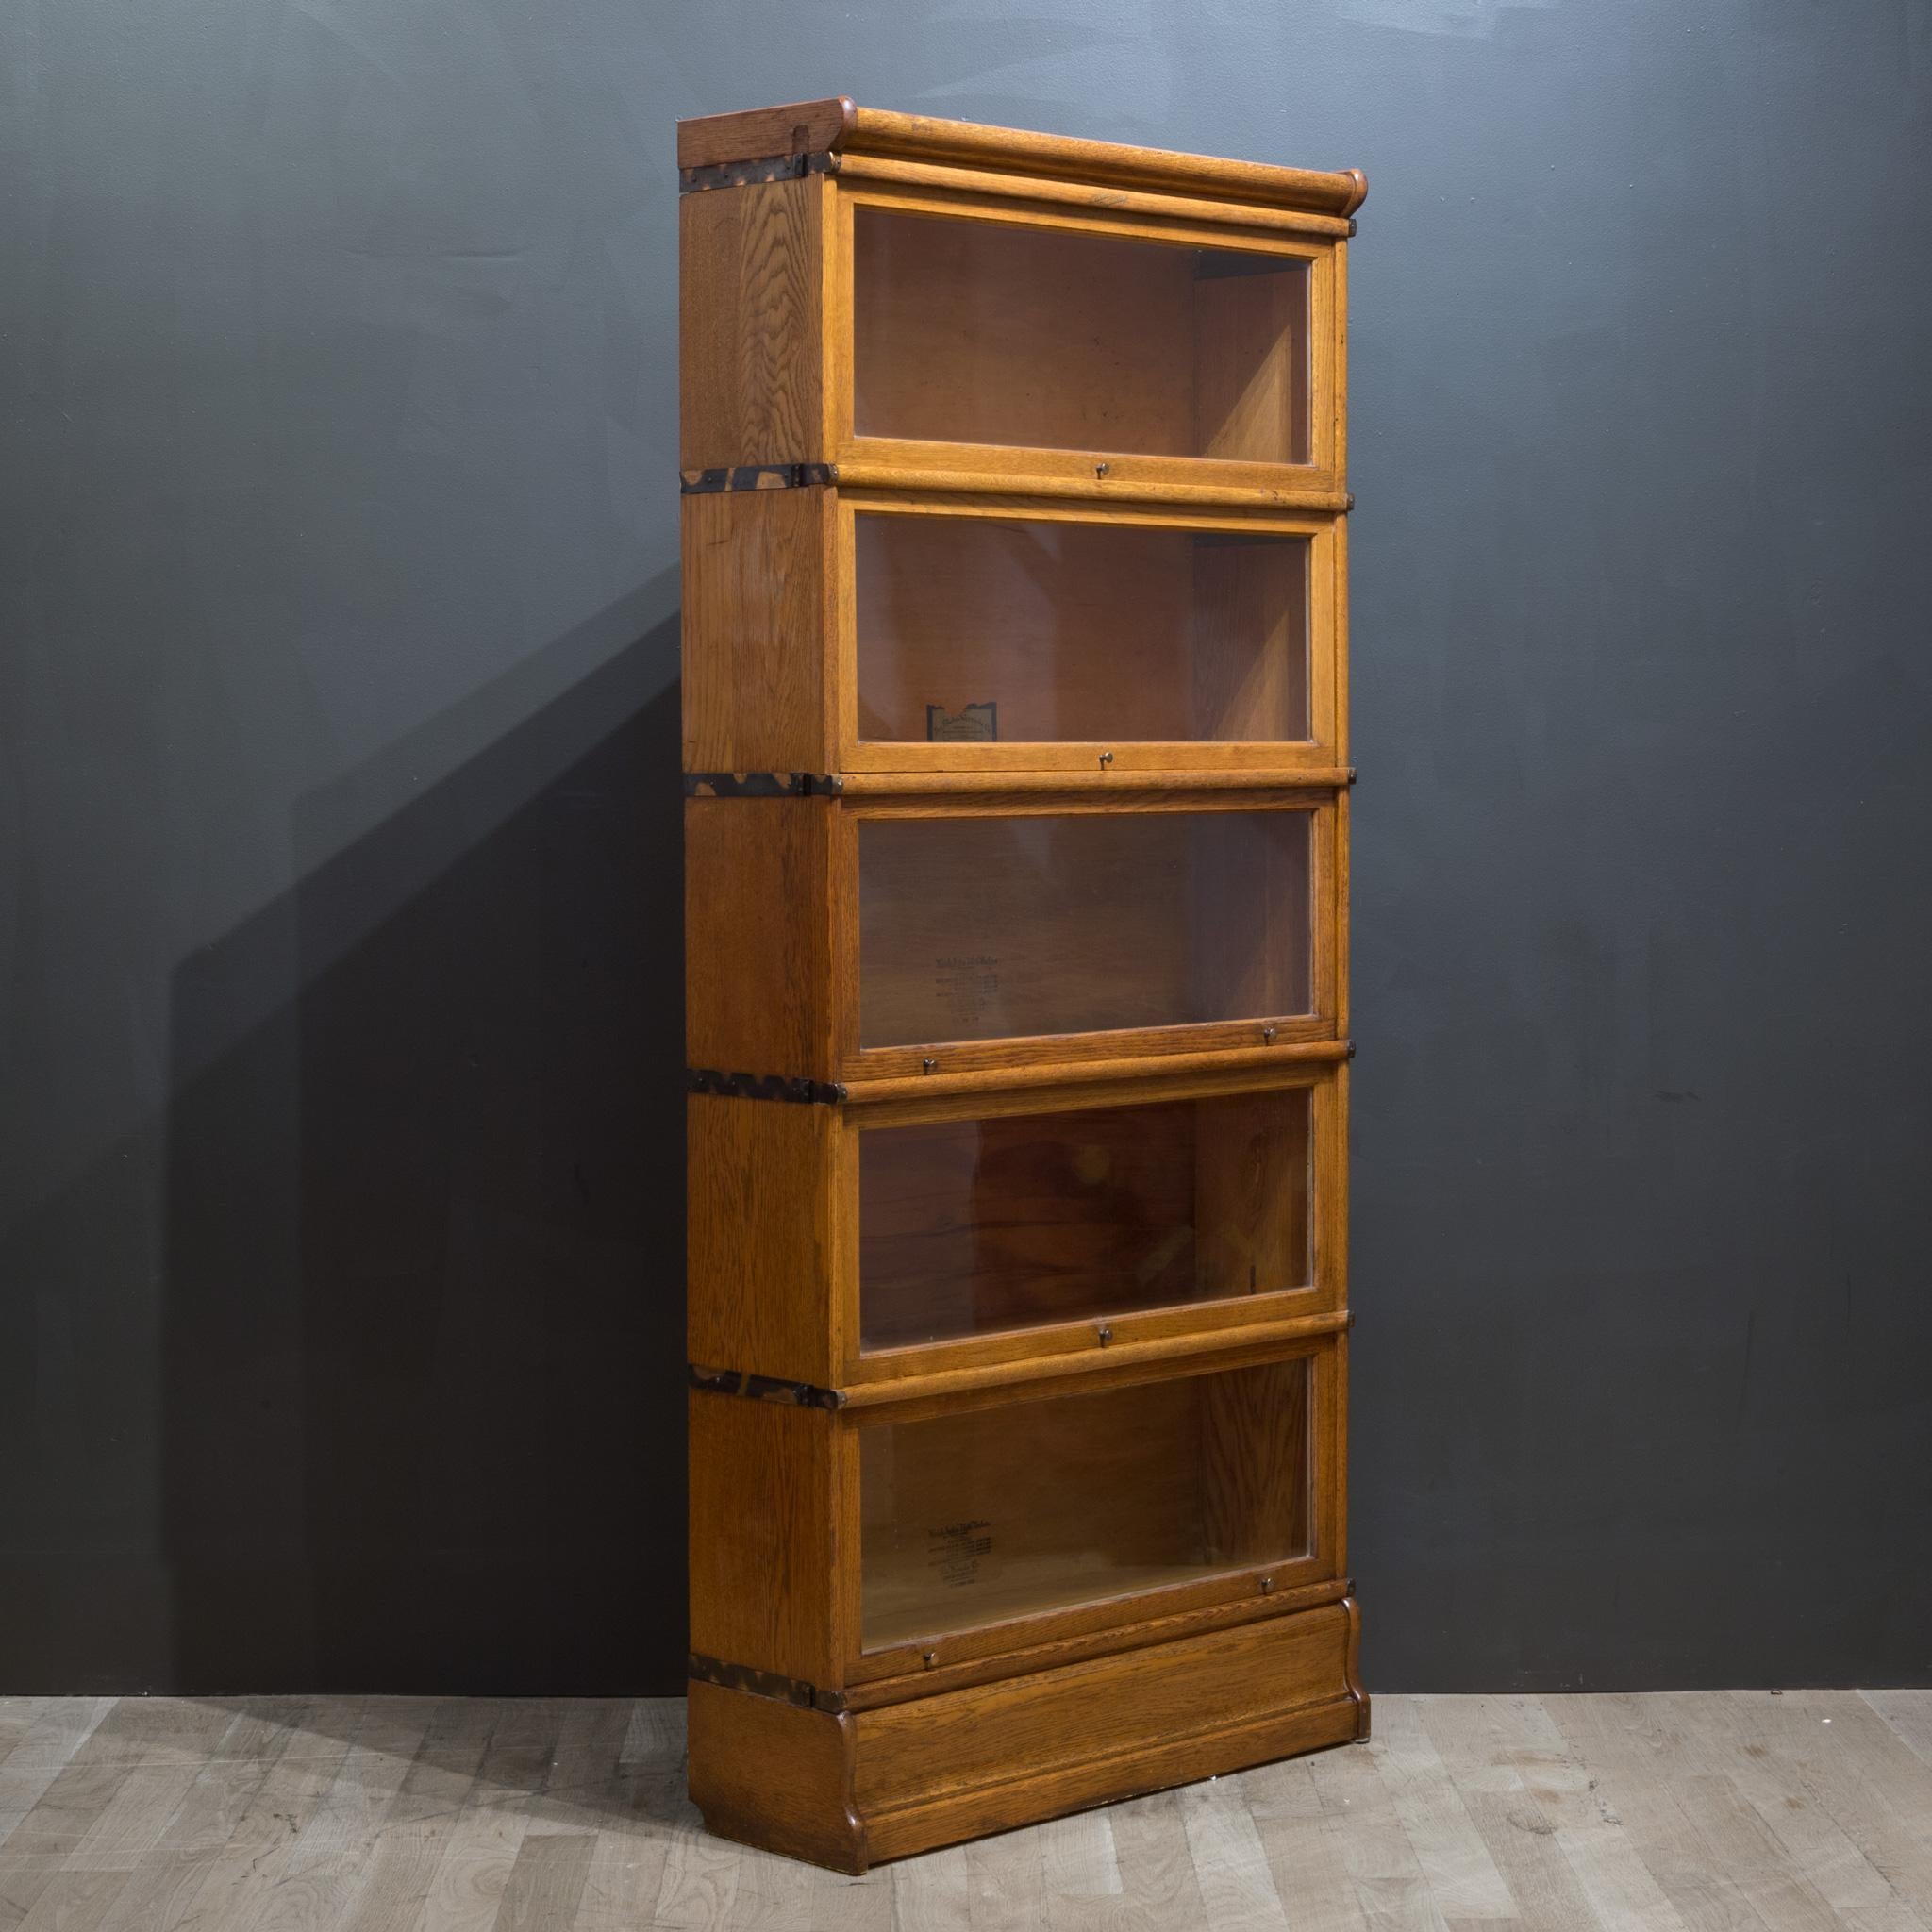 Late Victorian Early 20th C. Globe-Wernicke 5 Stack Lawyer's Bookcase c.1890